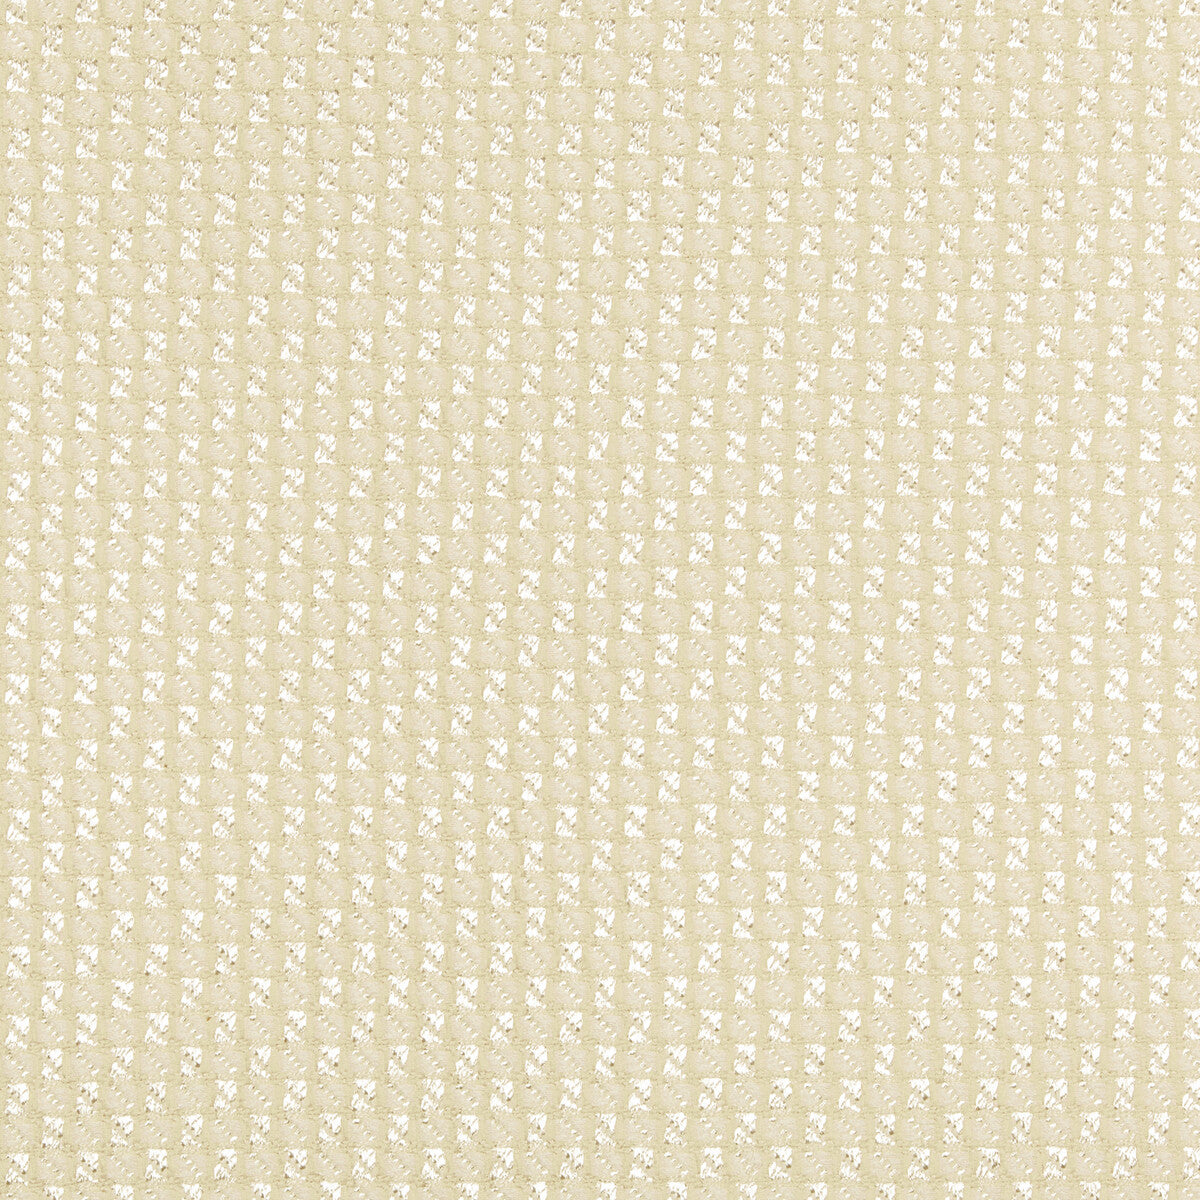 Fortesa fabric in ivory color - pattern 35848.116.0 - by Kravet Couture in the Windsor Smith Naila collection